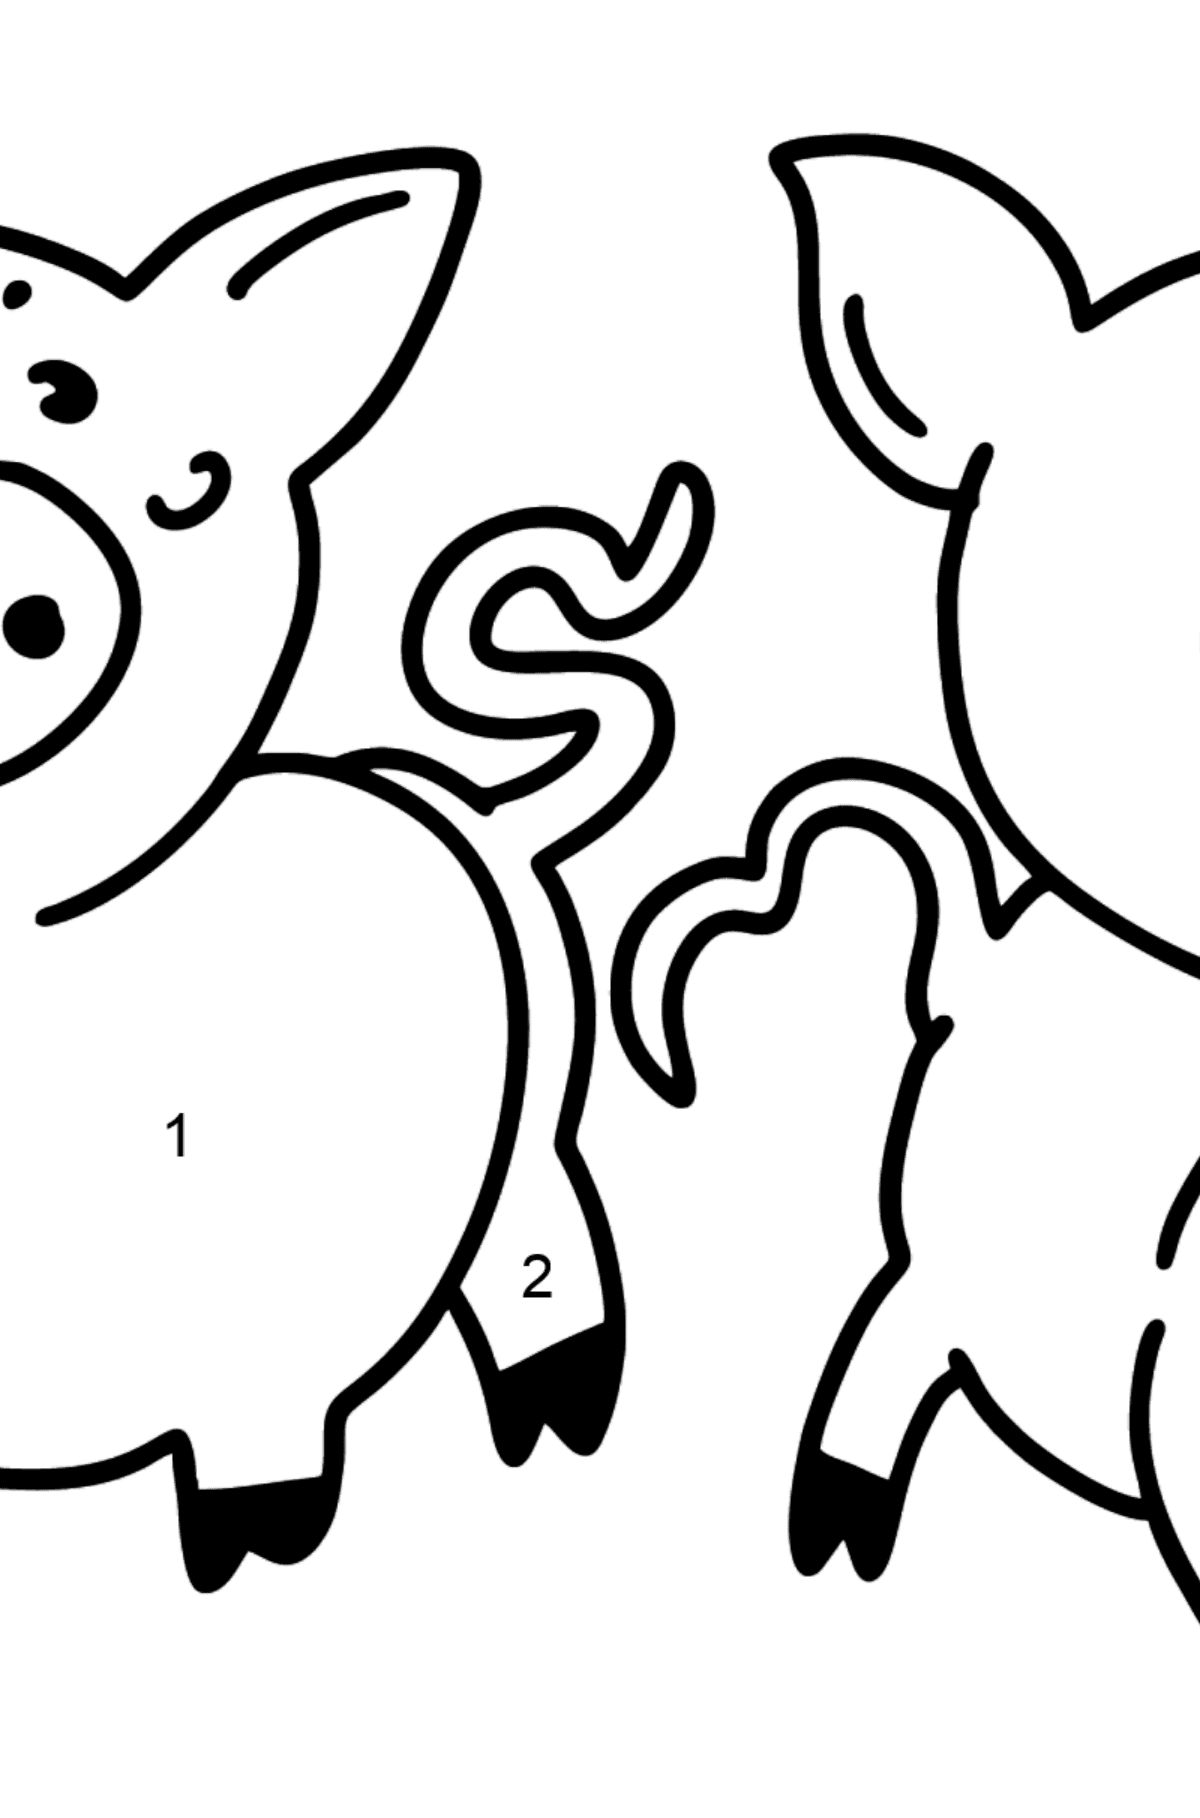 Piglets coloring page - Coloring by Numbers for Kids